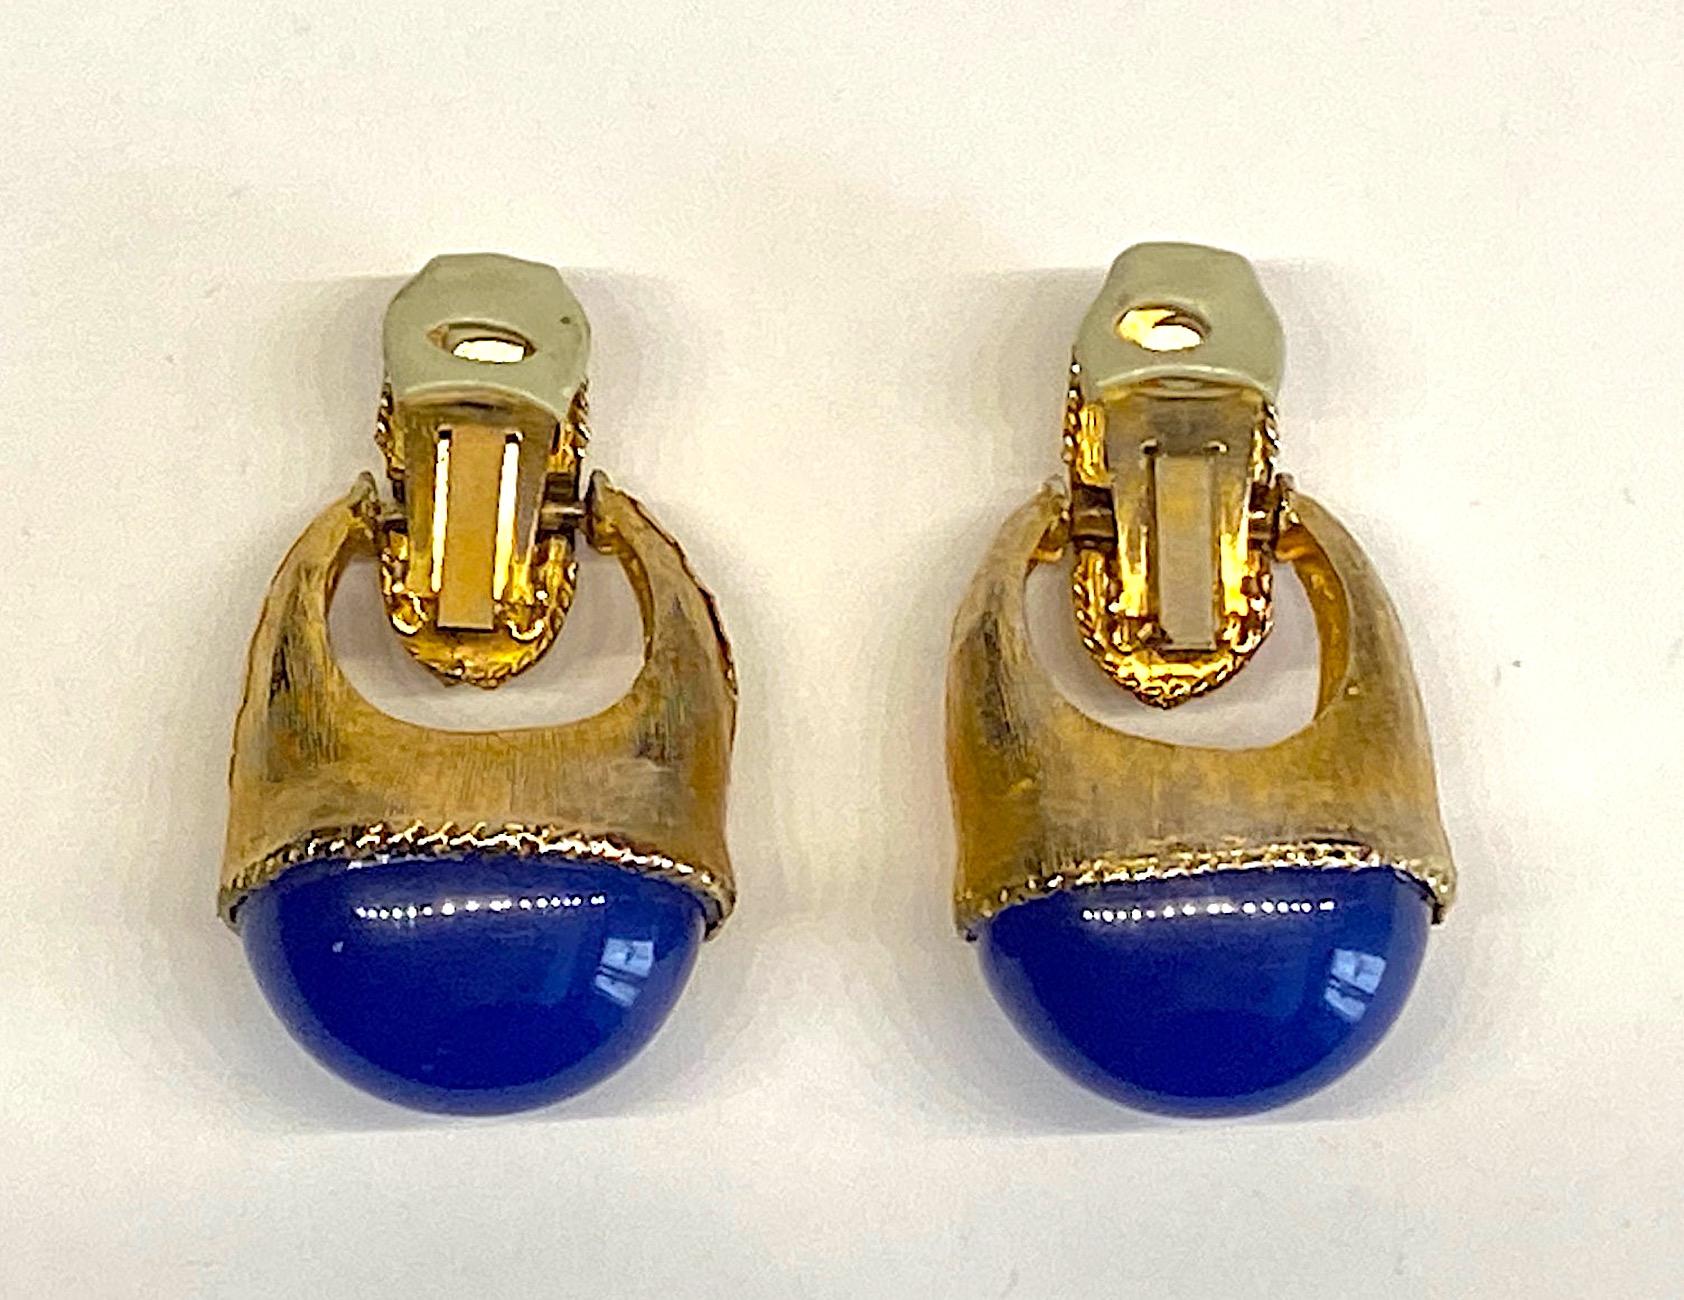 1980s Gold with Large Lapis Blue Cabochon Pendant Earrings 1